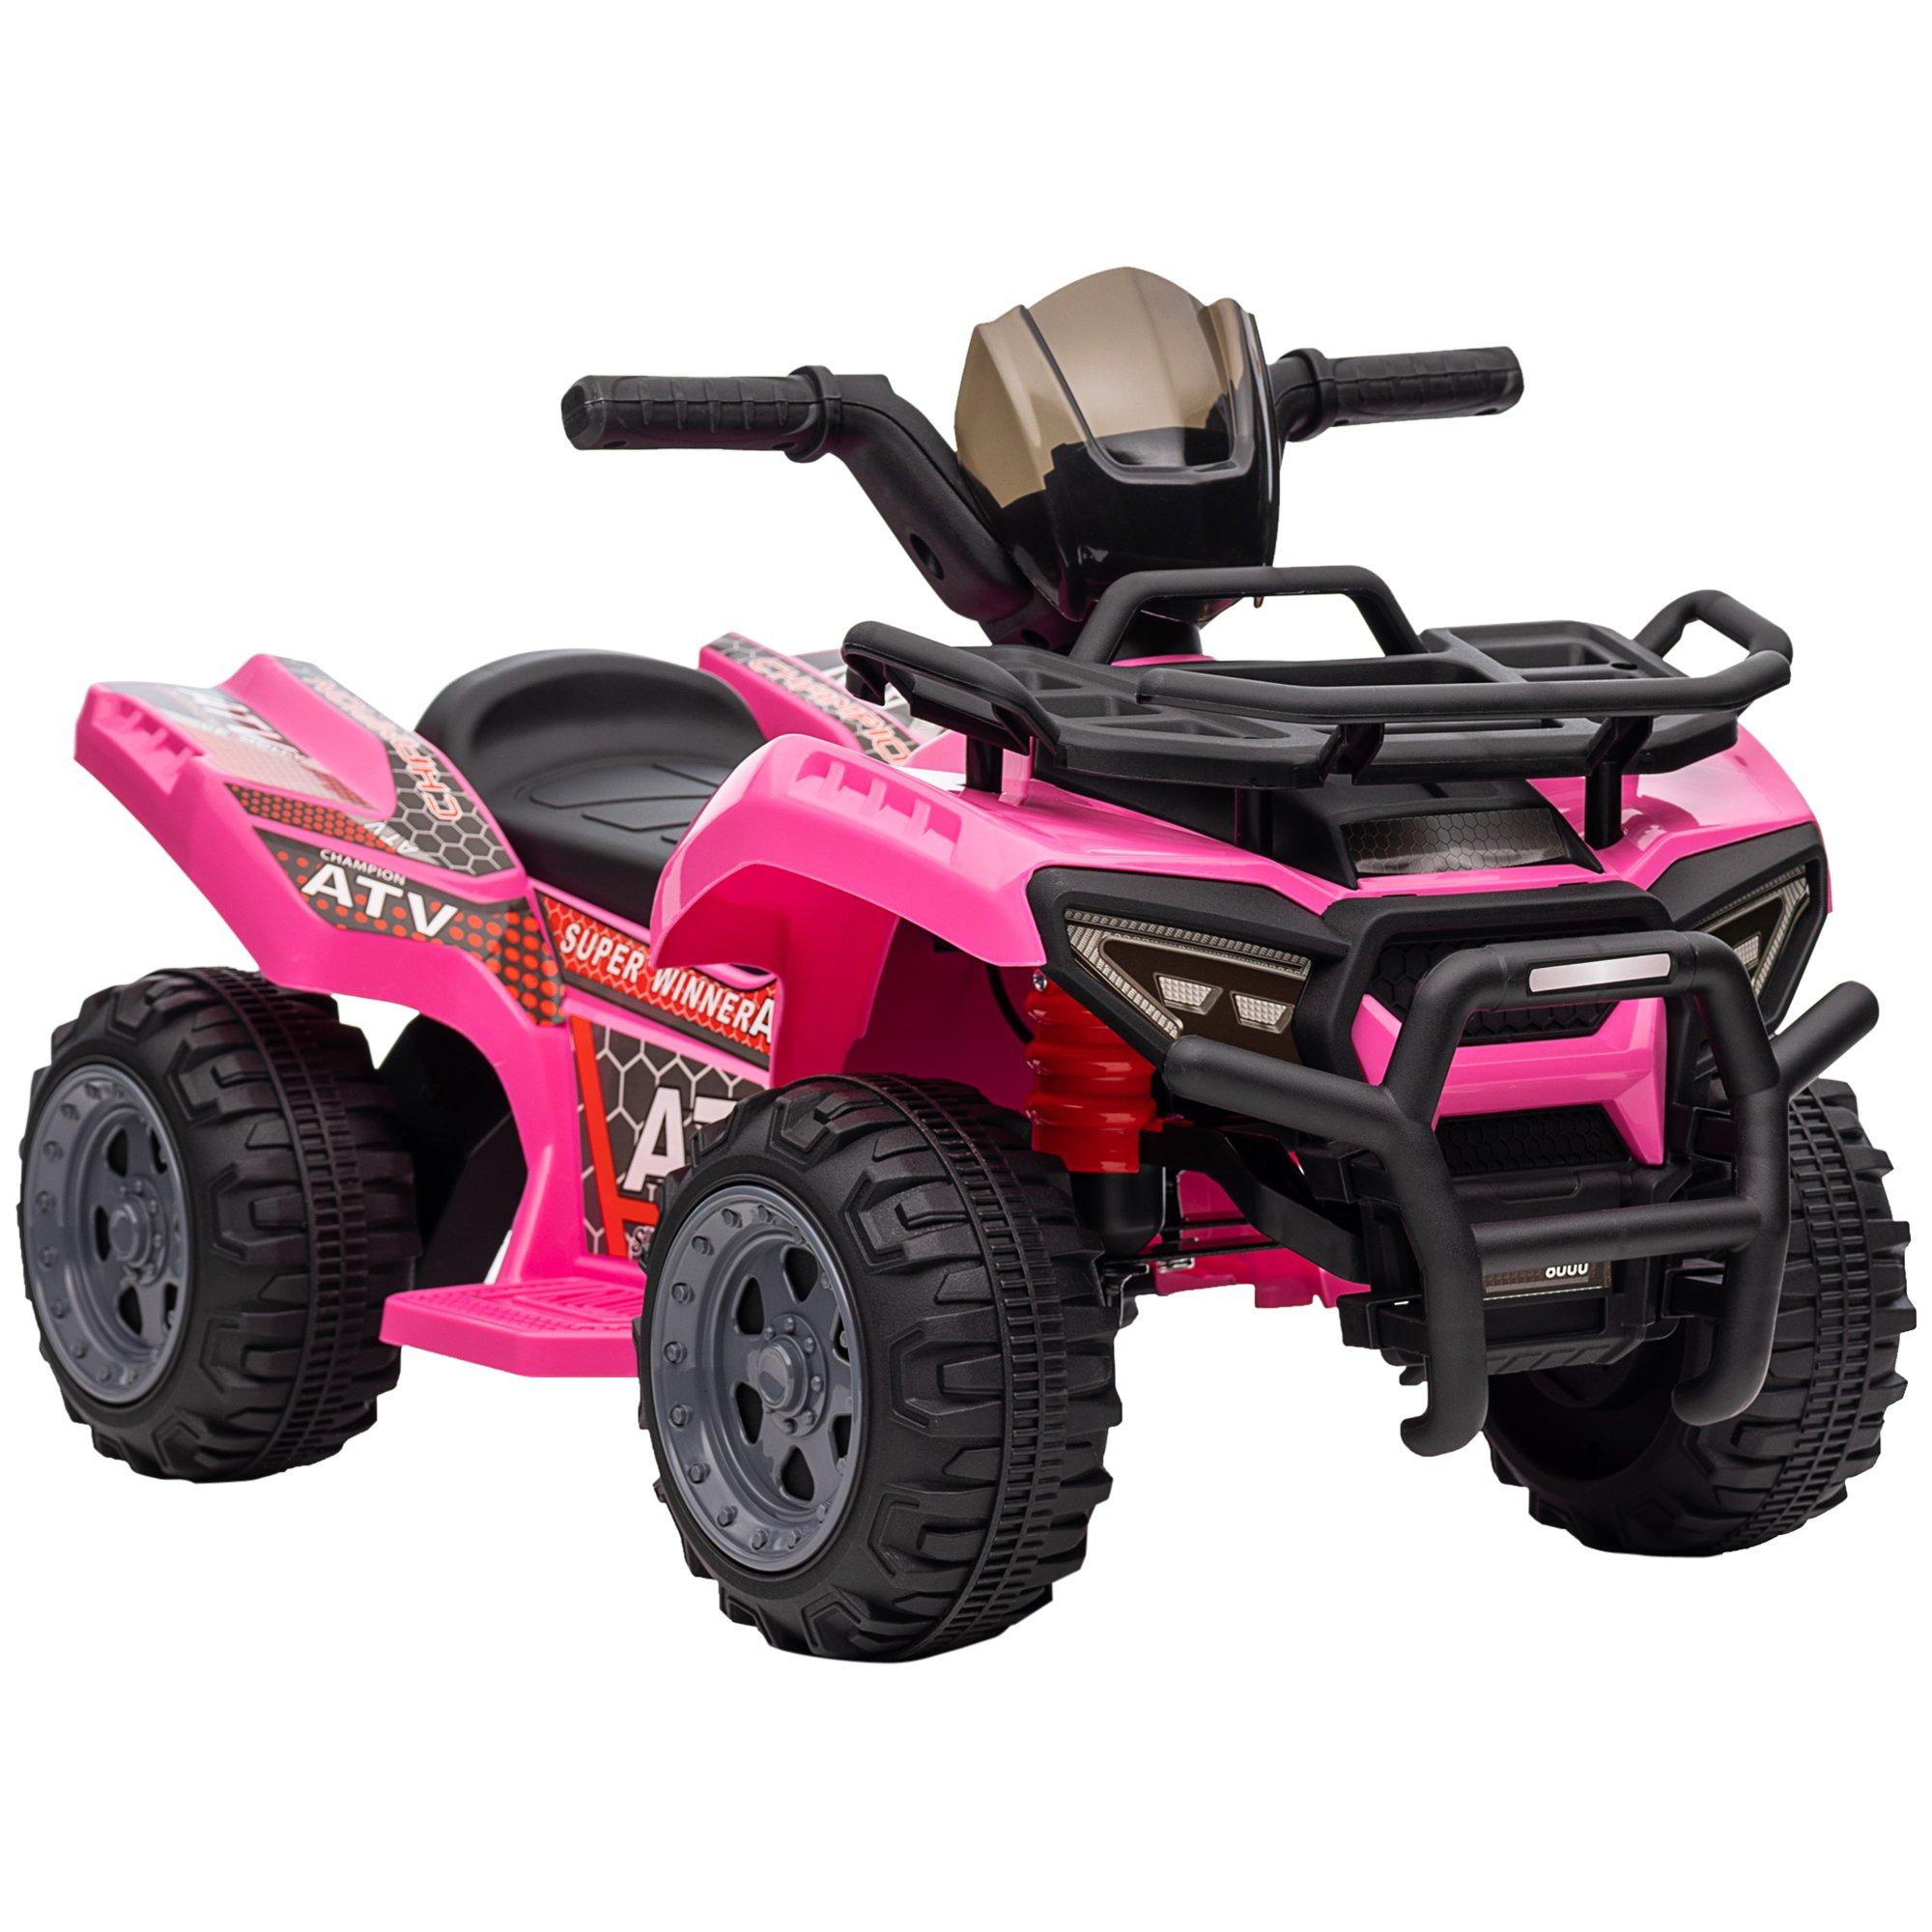 Kids Ride-on Four Wheeler ATV Car with Music for 18-36 months